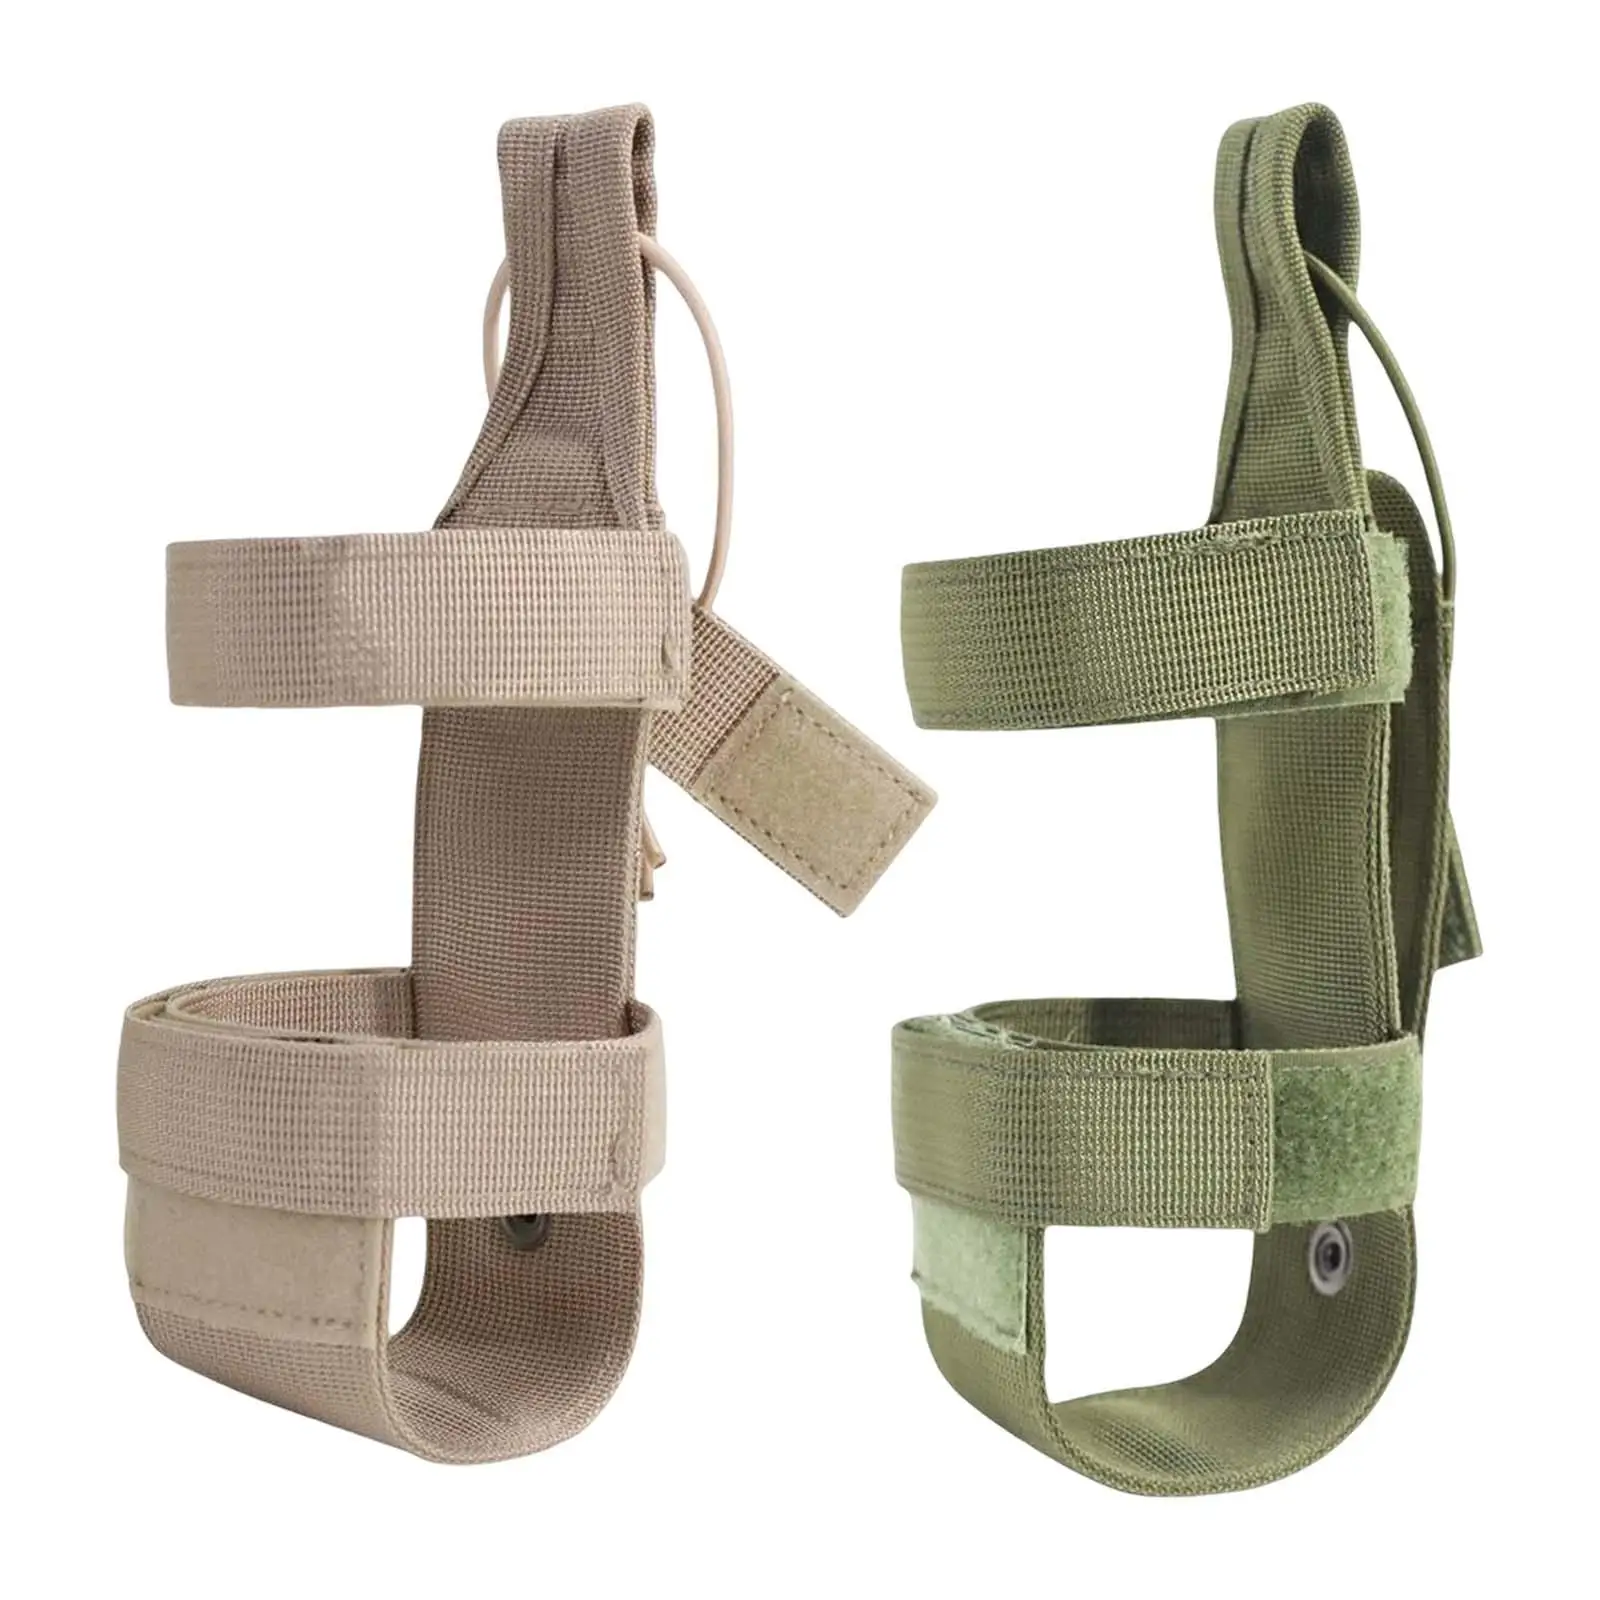 Durable Water Bottle Holder Hydration Carrier Belt Holder Kettle Carrying Bag Pouch for Cycling Hunting Outdoor Camping Sports